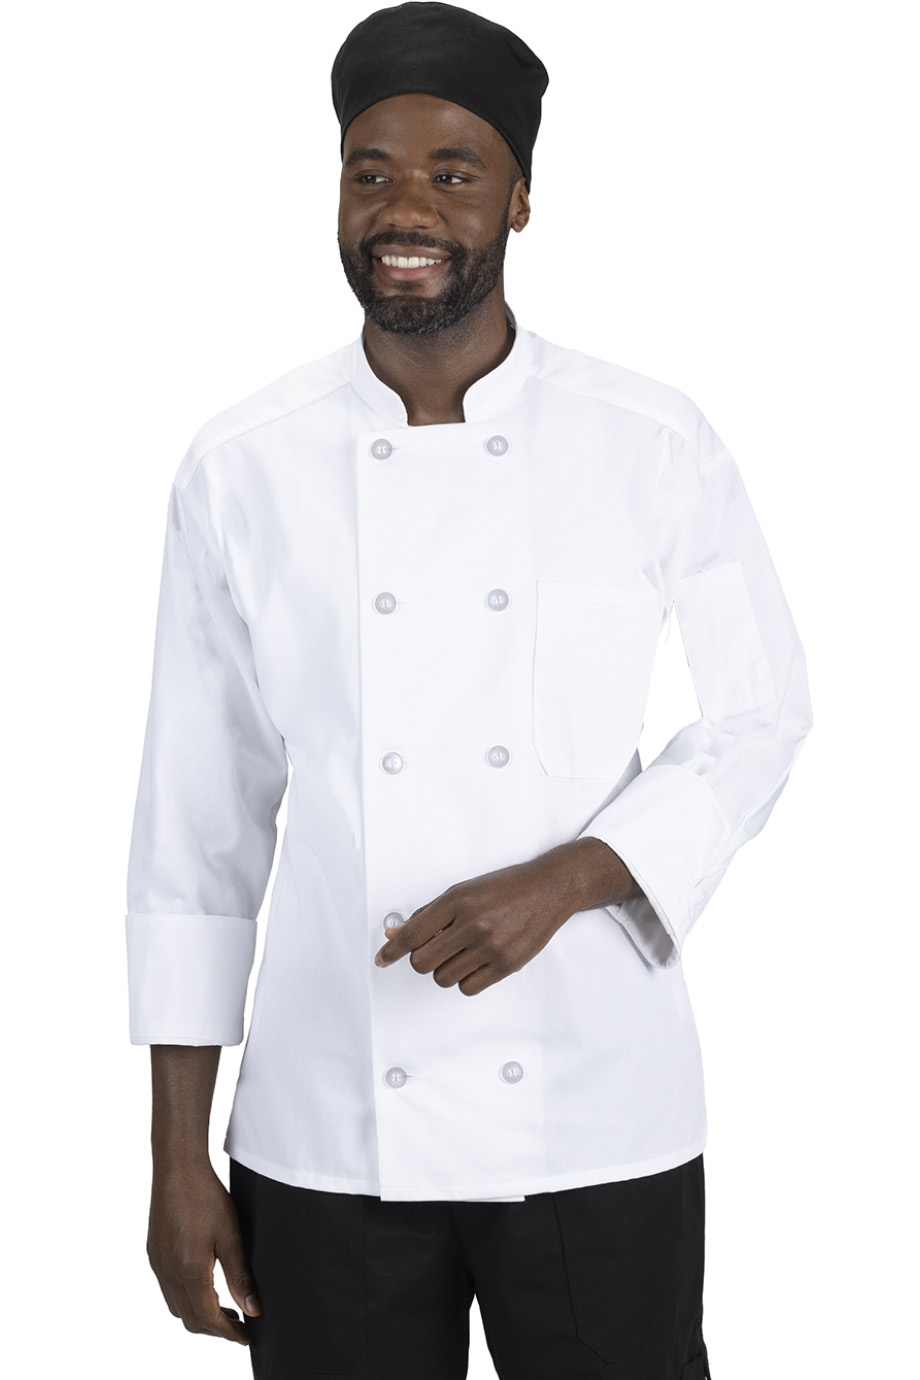 CASUAL CHEF | COAT 8-BUTTONS - Edwards Garment